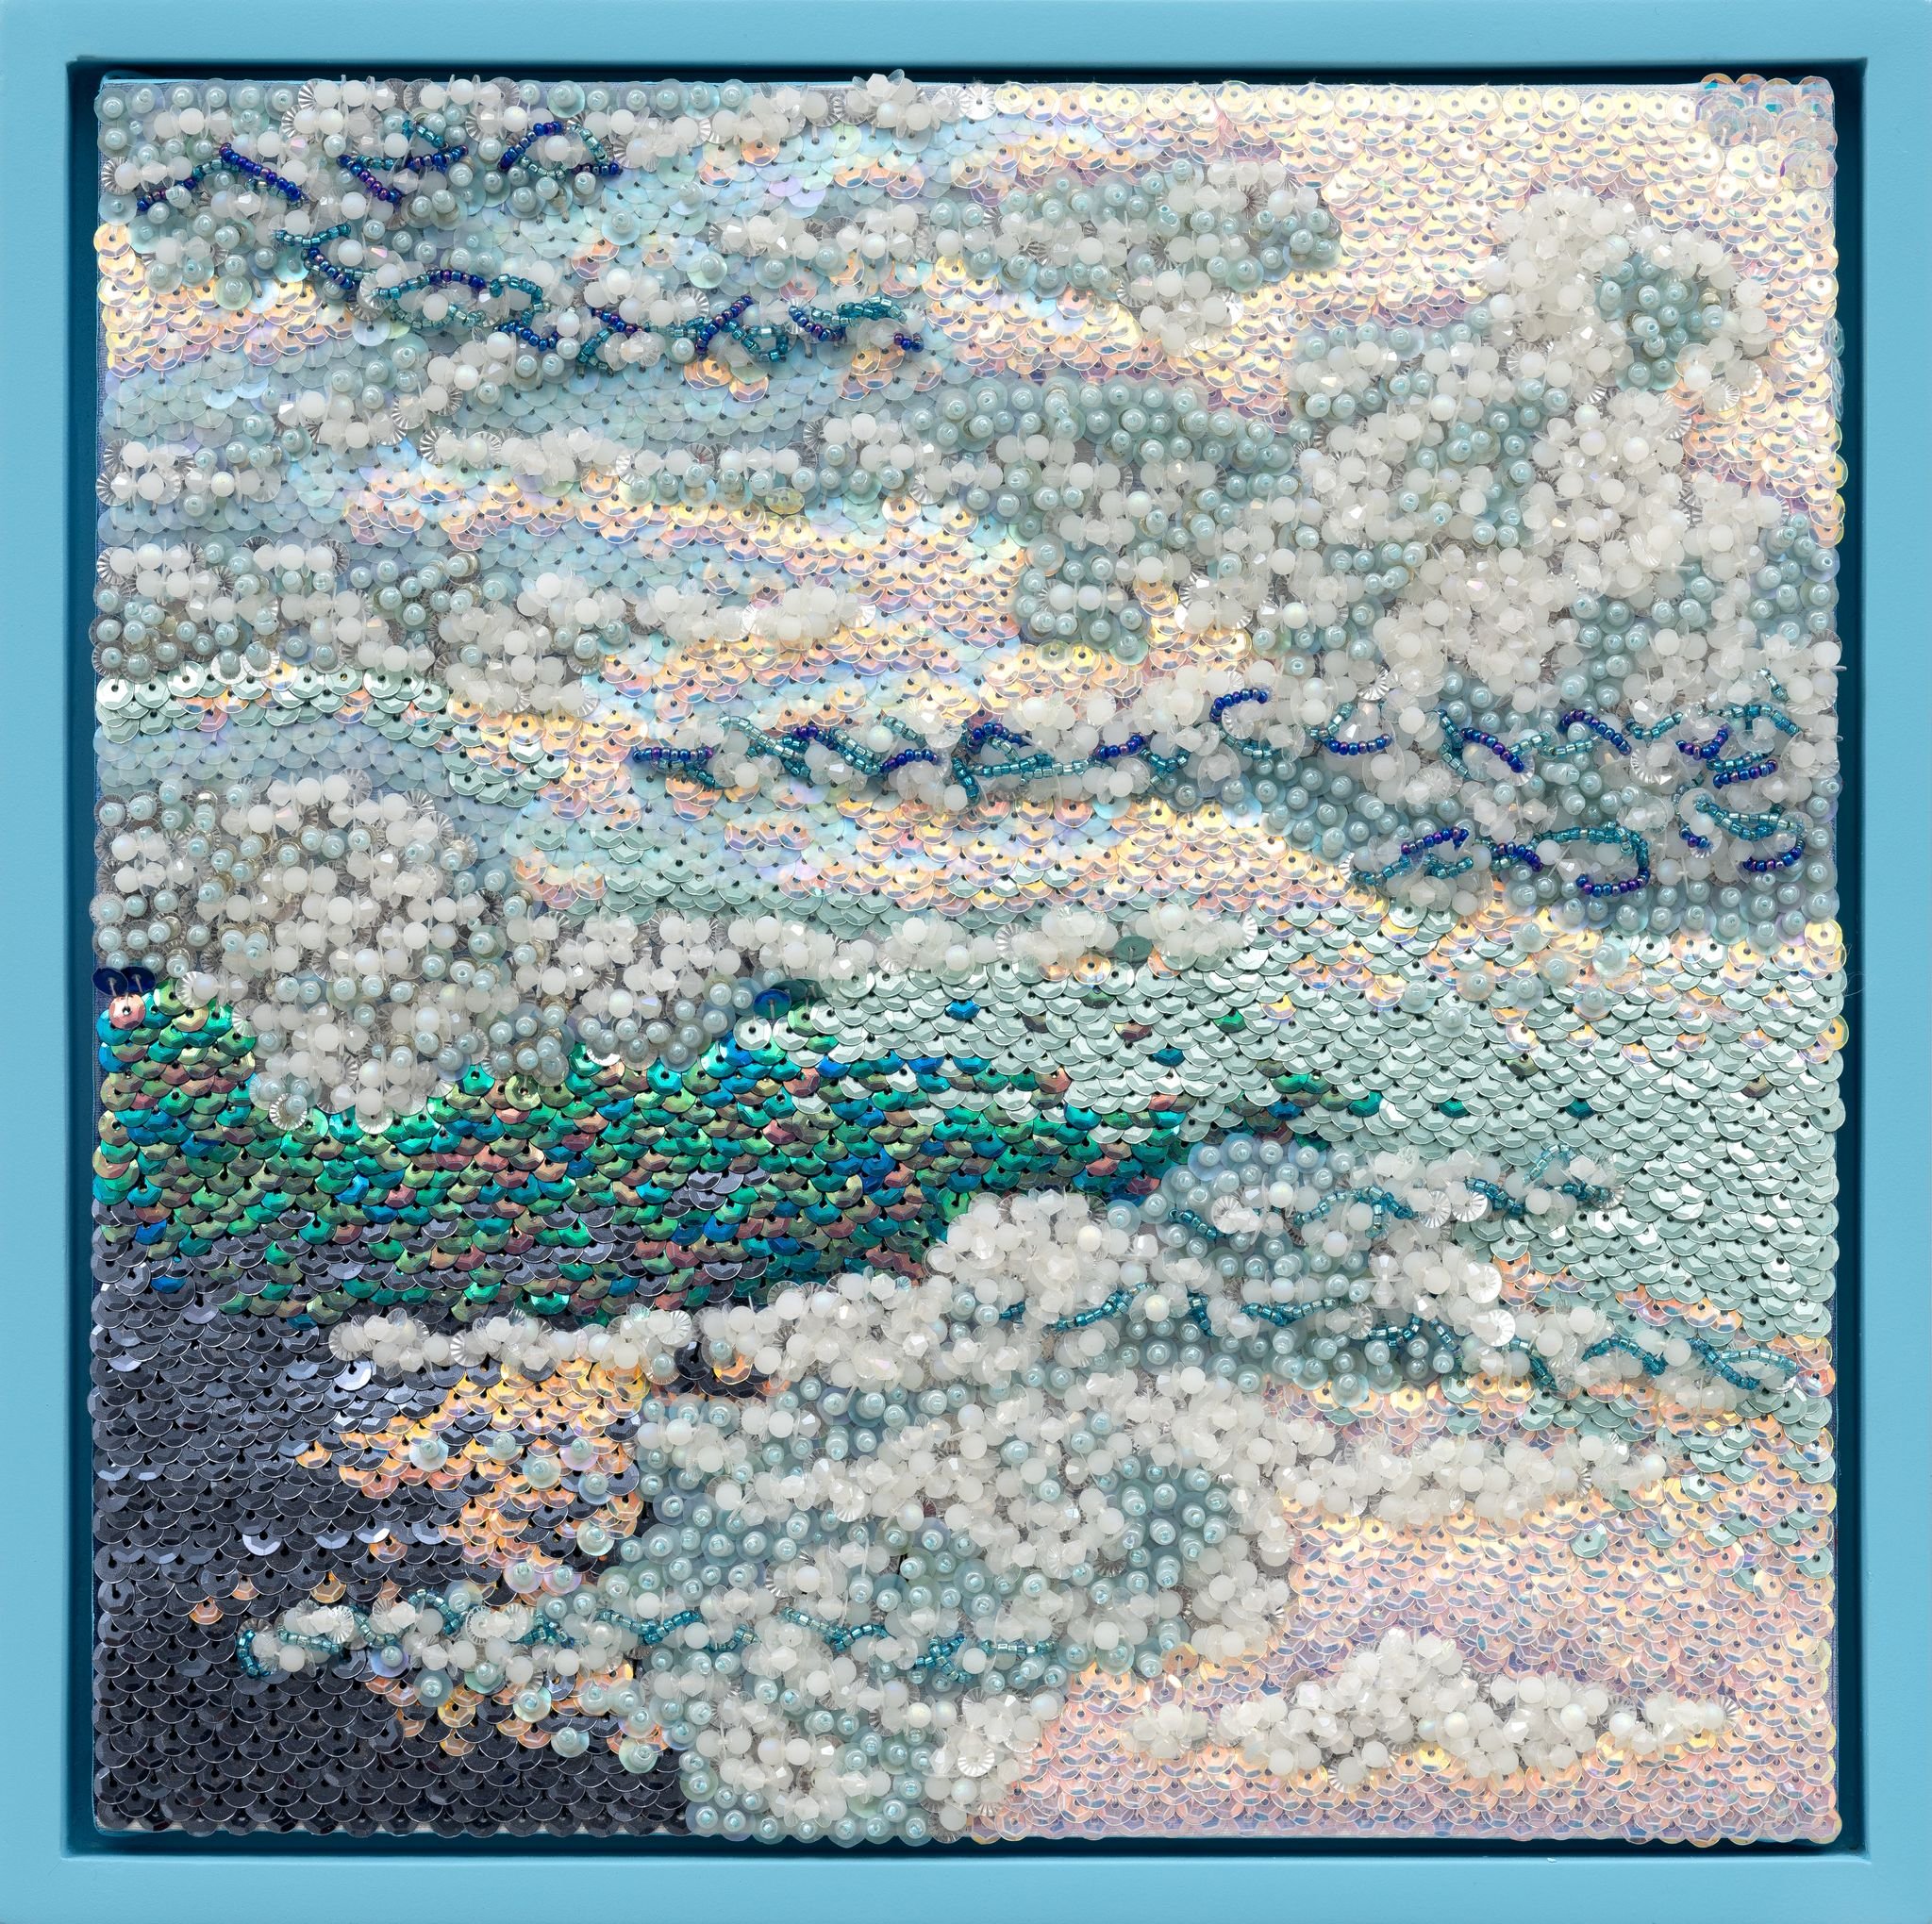  Tia-Thuy Nguyen, Too dreamy to be true (Ng mơ là thực), 2023 Embellishment on canvas 30 x 30 cm, 12 x 12 in Photo: Nicolas Brasseur  © Tia-Thuy Nguyen / Courtesy of the Artist and Almine Rech 